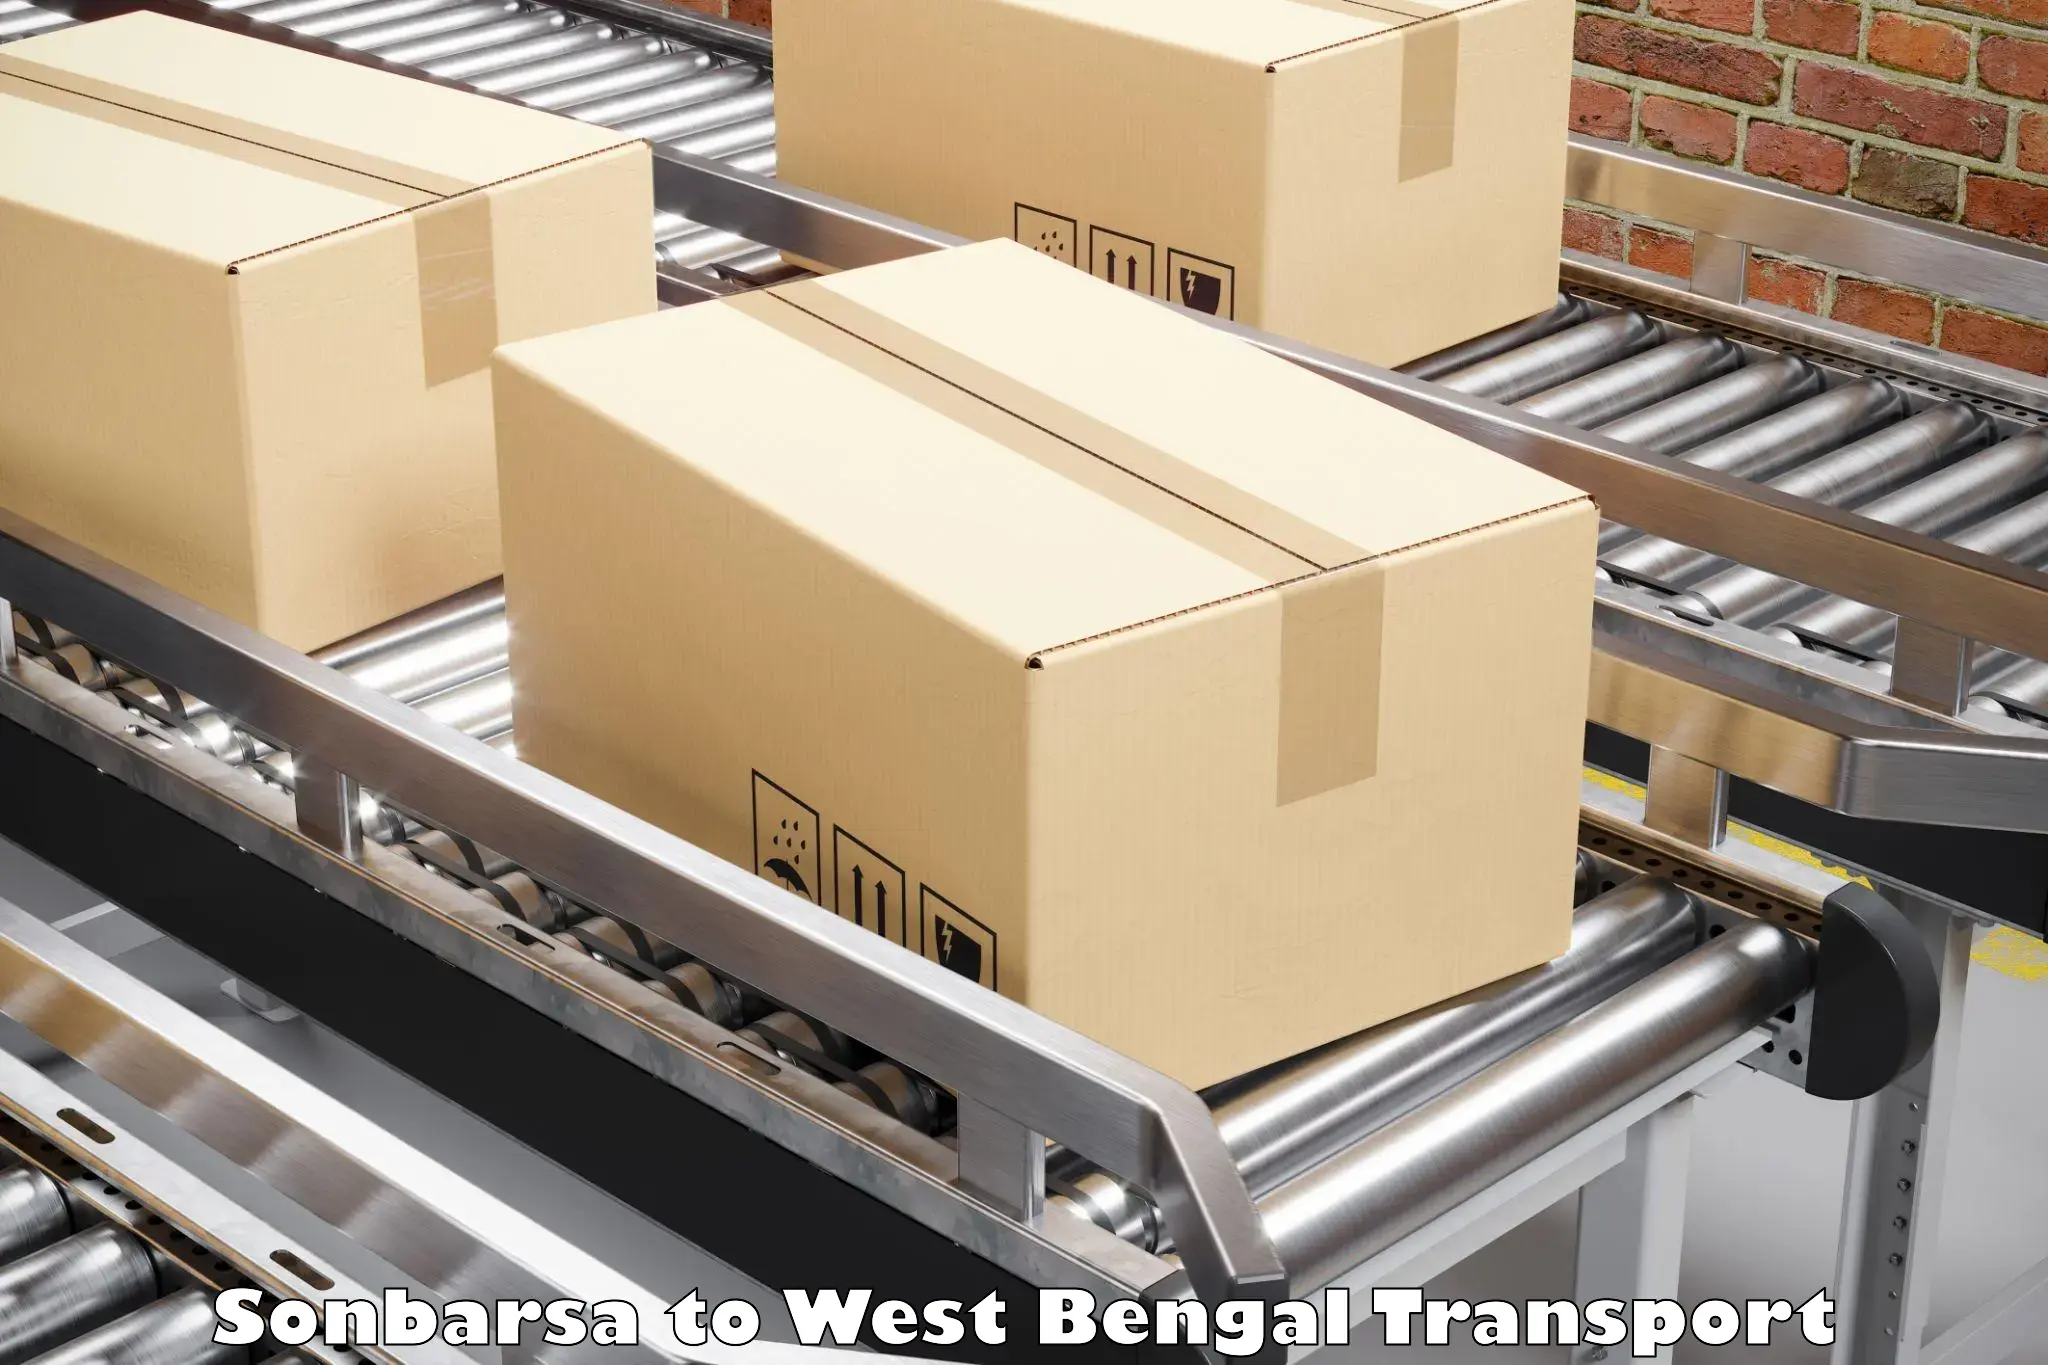 Daily parcel service transport Sonbarsa to West Bengal